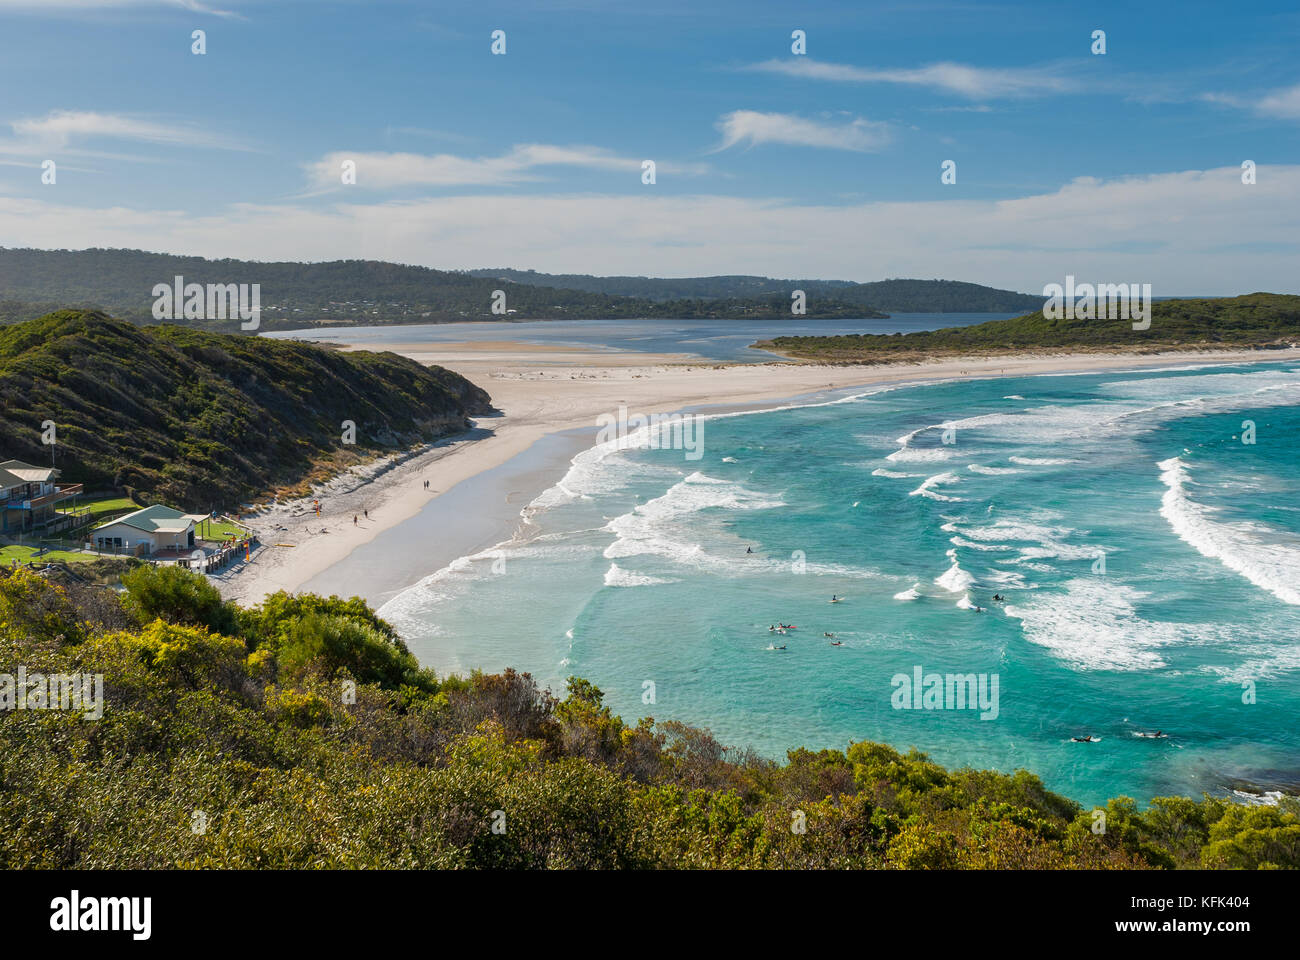 Surfers ride the waves rthat oll into the protected beach at Ocean Beach in Denmark, along the south coast of Western Australia. Stock Photo